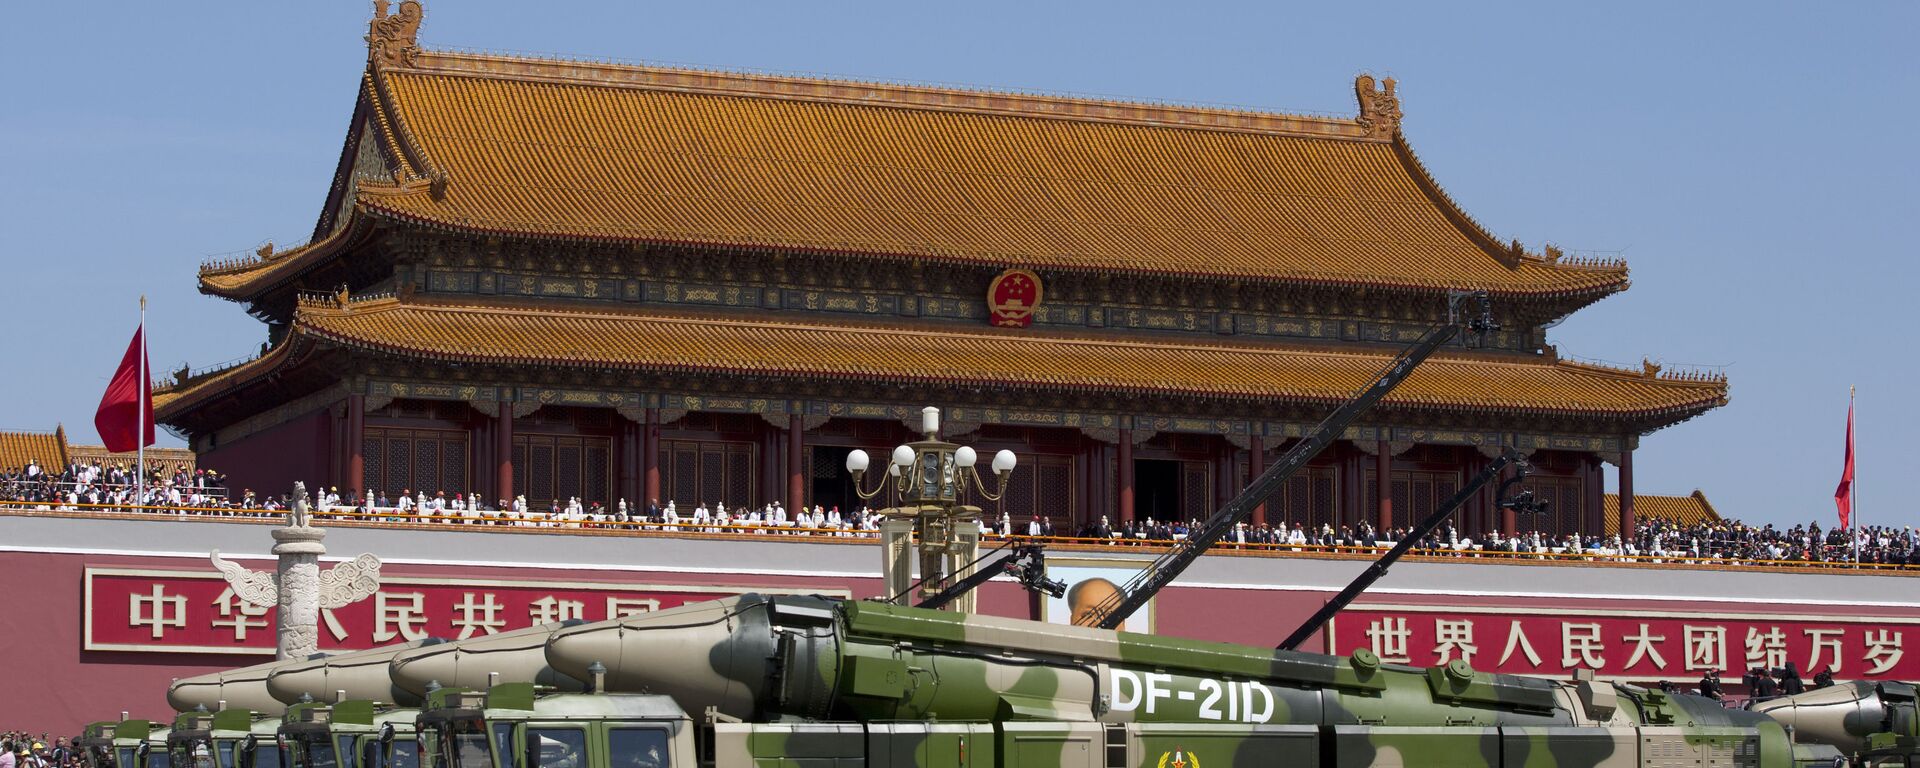 In this Sept. 3, 2015, file photo, Chinese military vehicles carrying DF-21D anti-ship ballistic missiles, potentially capable of sinking a U.S. Nimitz-class aircraft carrier in a single strike, pass by Tiananmen Gate during a military parade to commemorate the 70th anniversary of the end of World War II, in Beijing. China’s military test-fired two missiles into the South China Sea, including a “carrier killer” military analysts suggest might have been developed to attack U.S. forces, a newspaper reported Thursday, Aug. 27, 2020. - Sputnik International, 1920, 16.11.2020